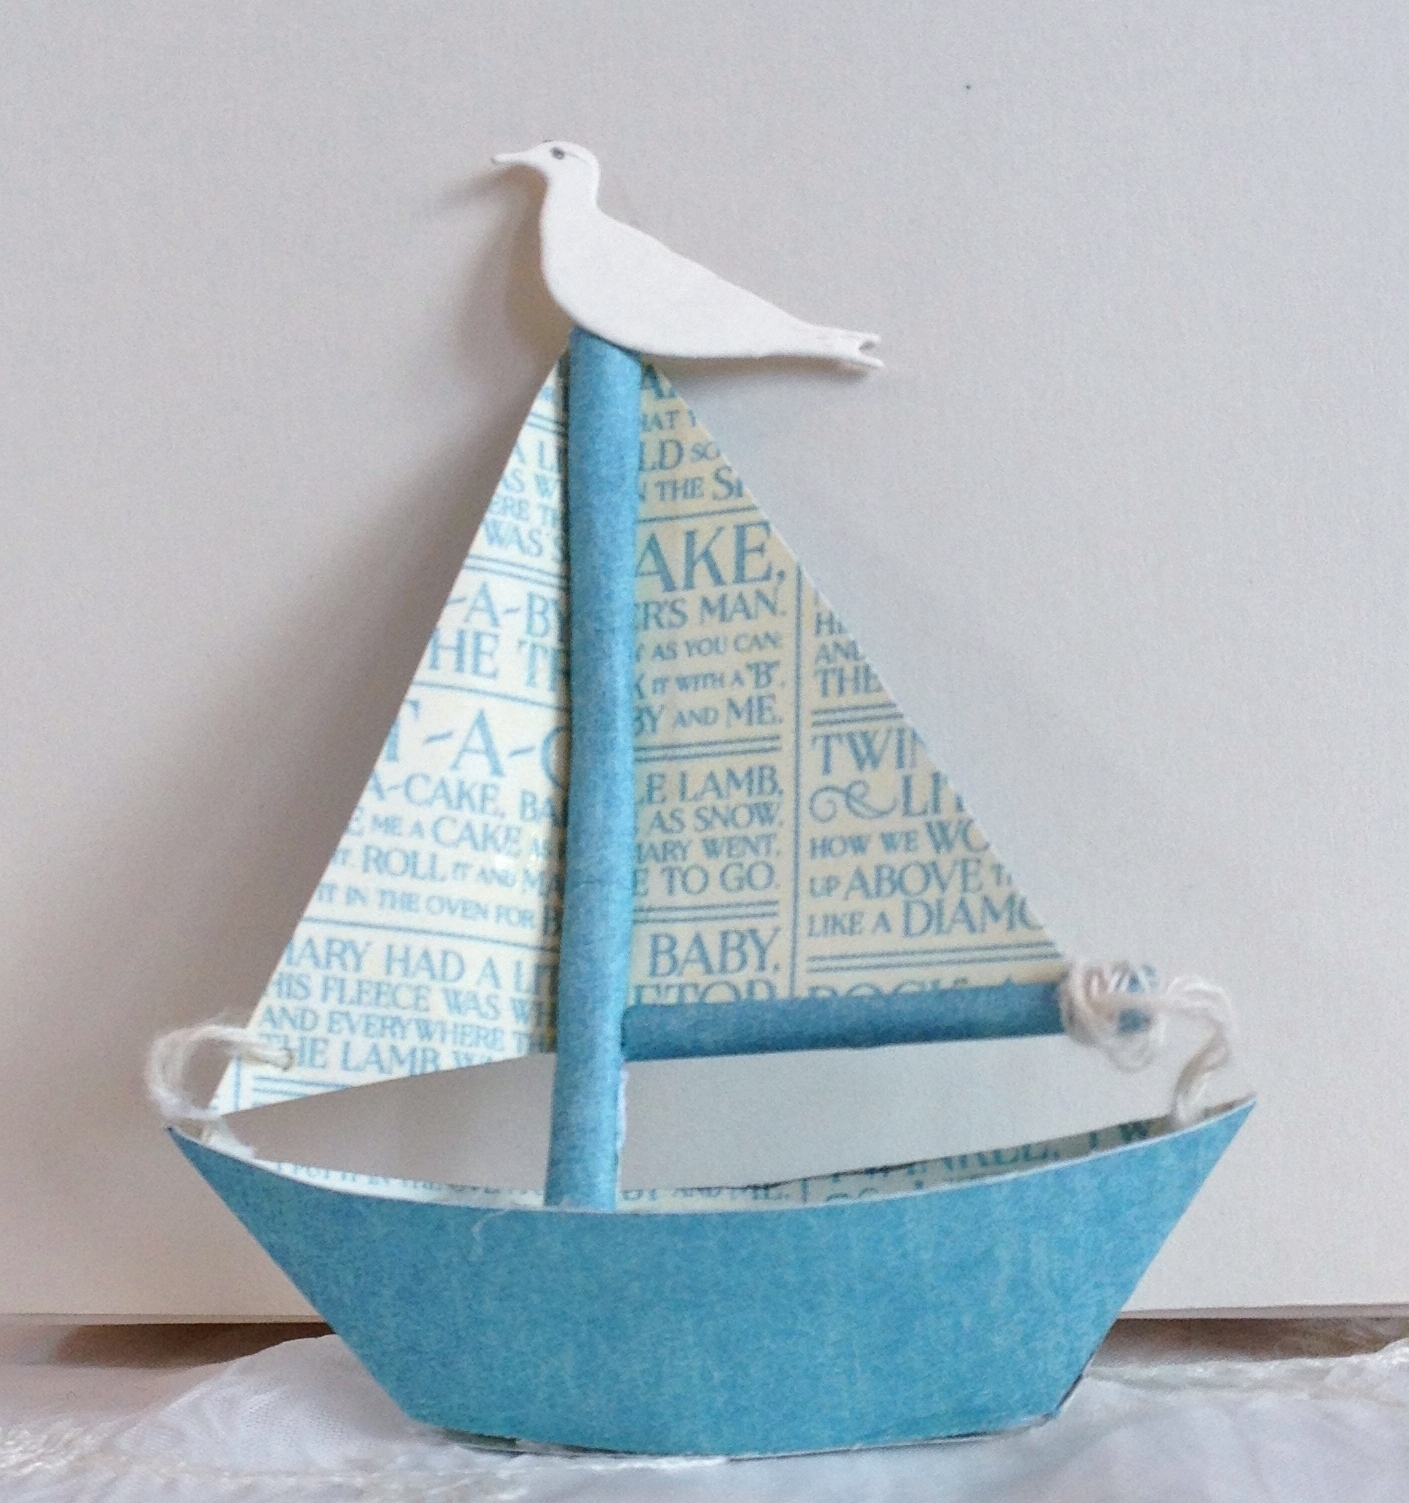 How To Make A Origami Sailboat Annes Papercreations How To Make The Tiny Paper Sailboat For The